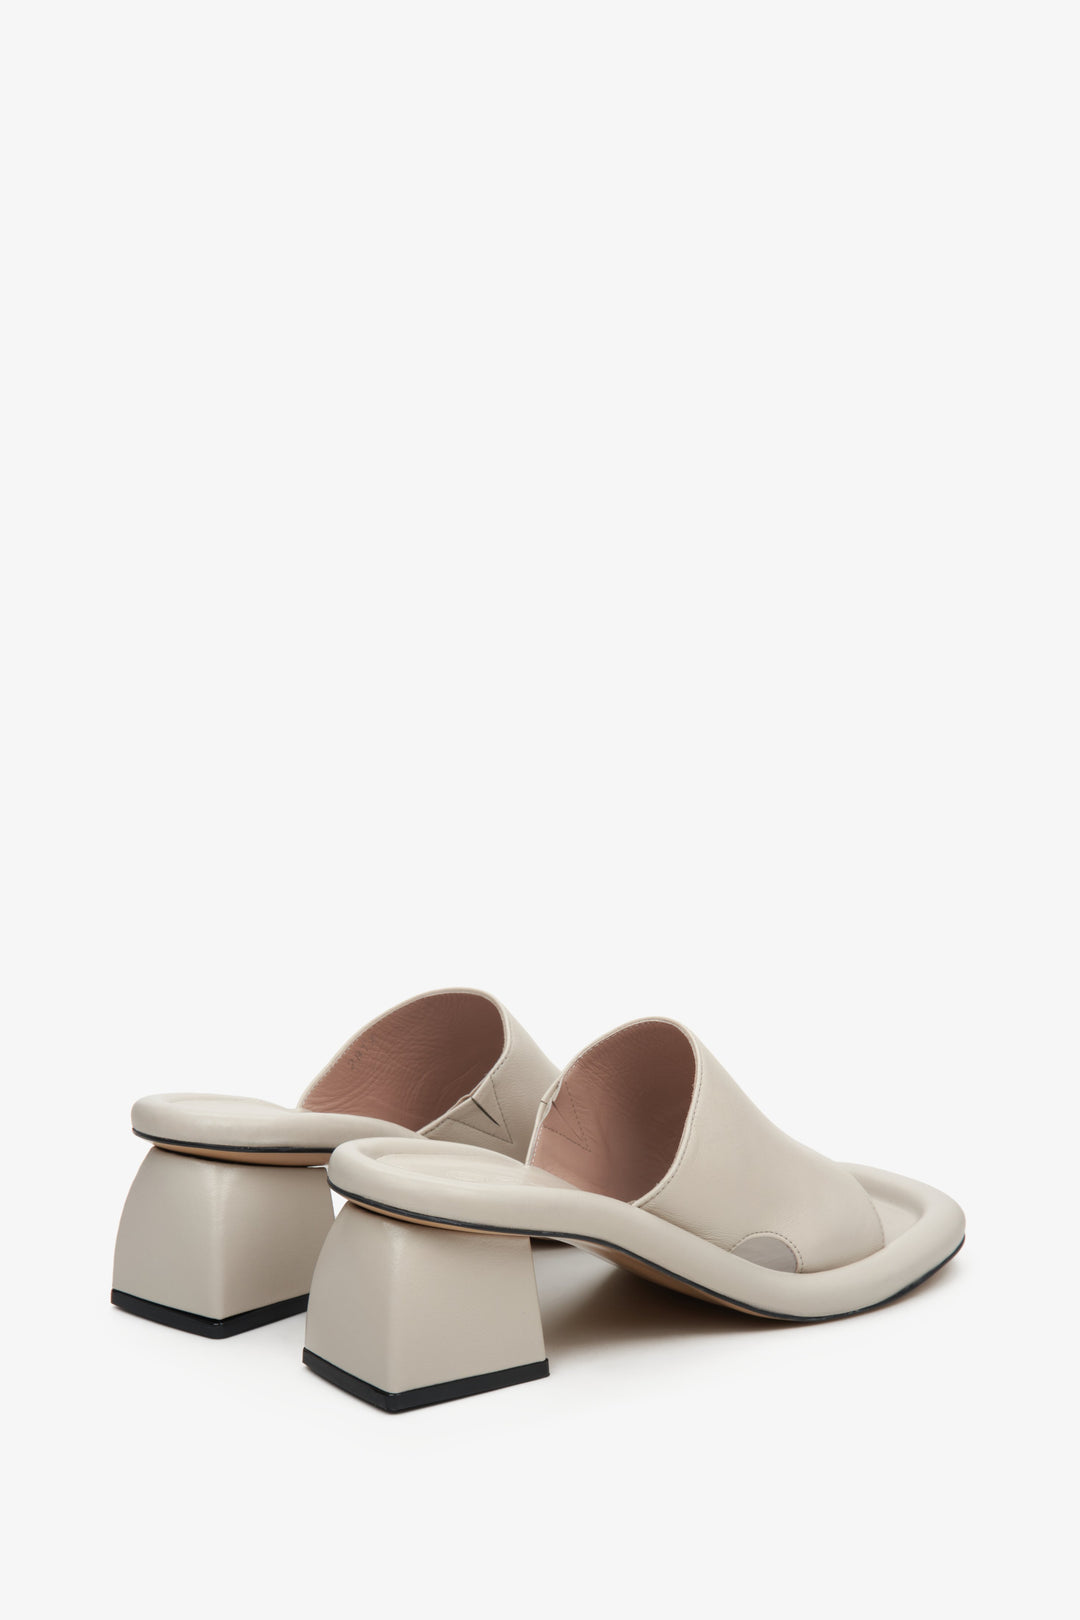 Women's beige mules with a square heel - a close-up of the back of the shoes.